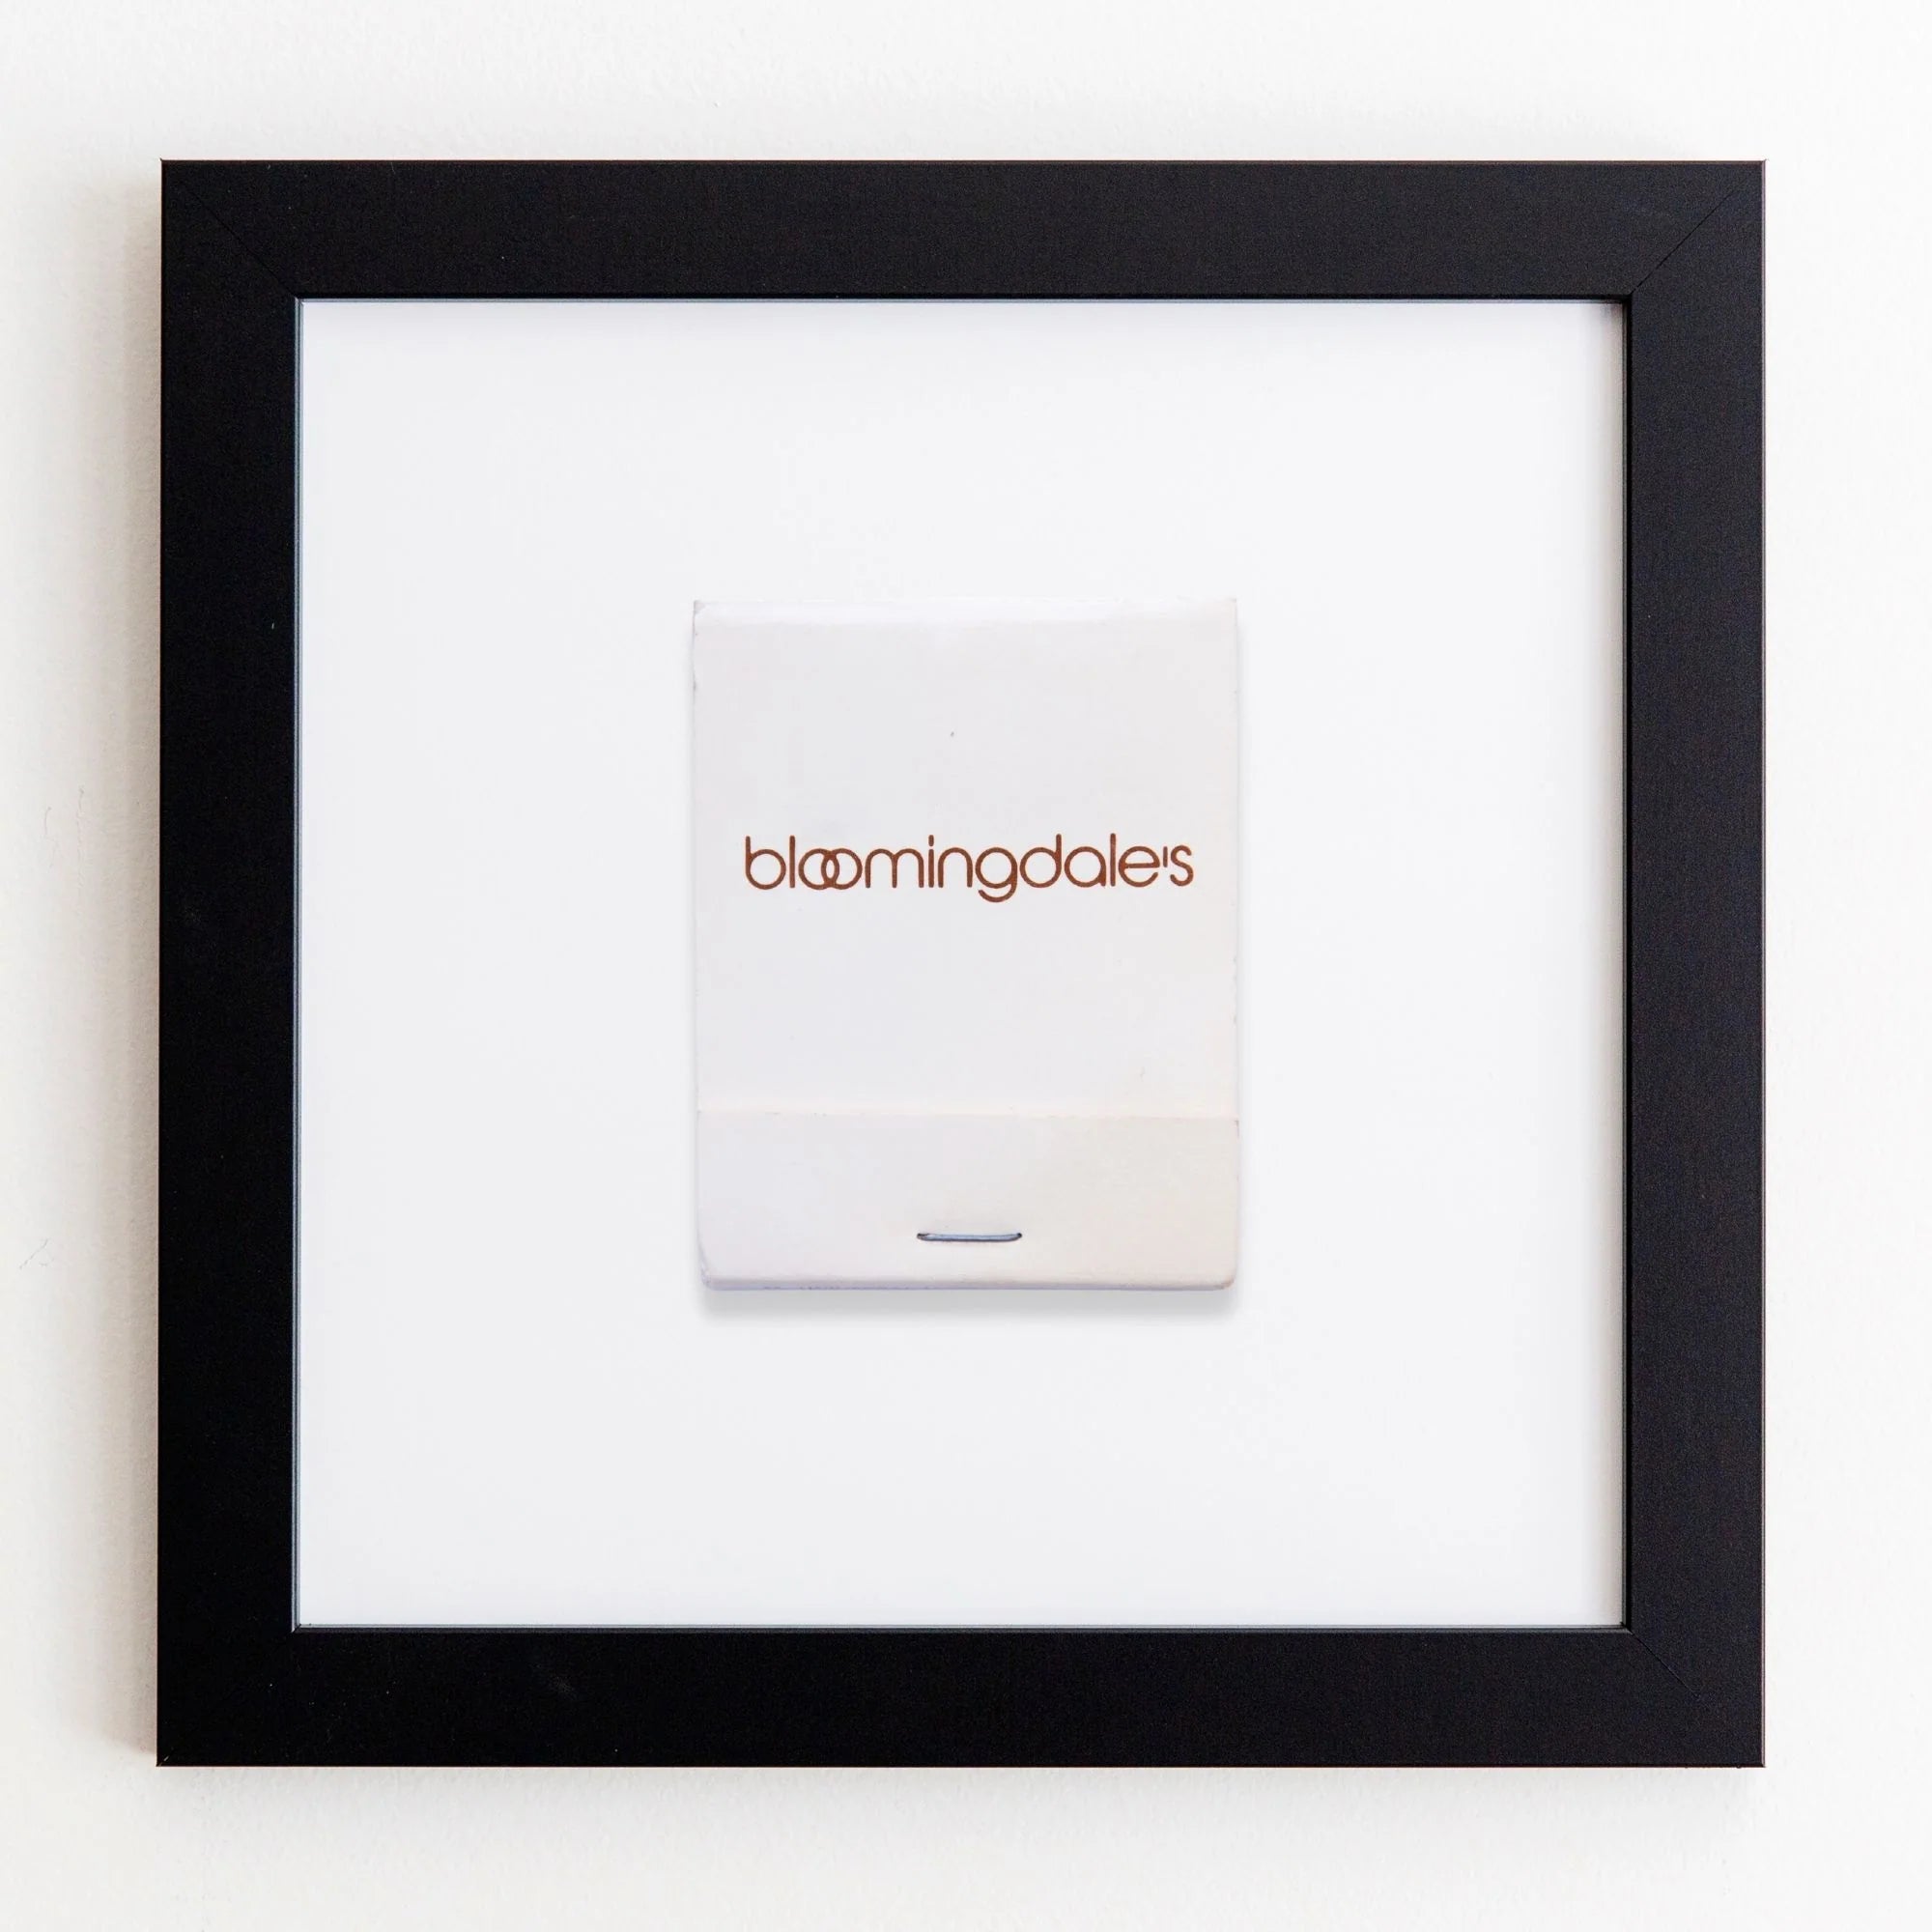 A framed Match South shopping bag, centered within a black acrylic frame, mounted on a white wall. The bag is plain white with the store's logo in lowercase black letters.